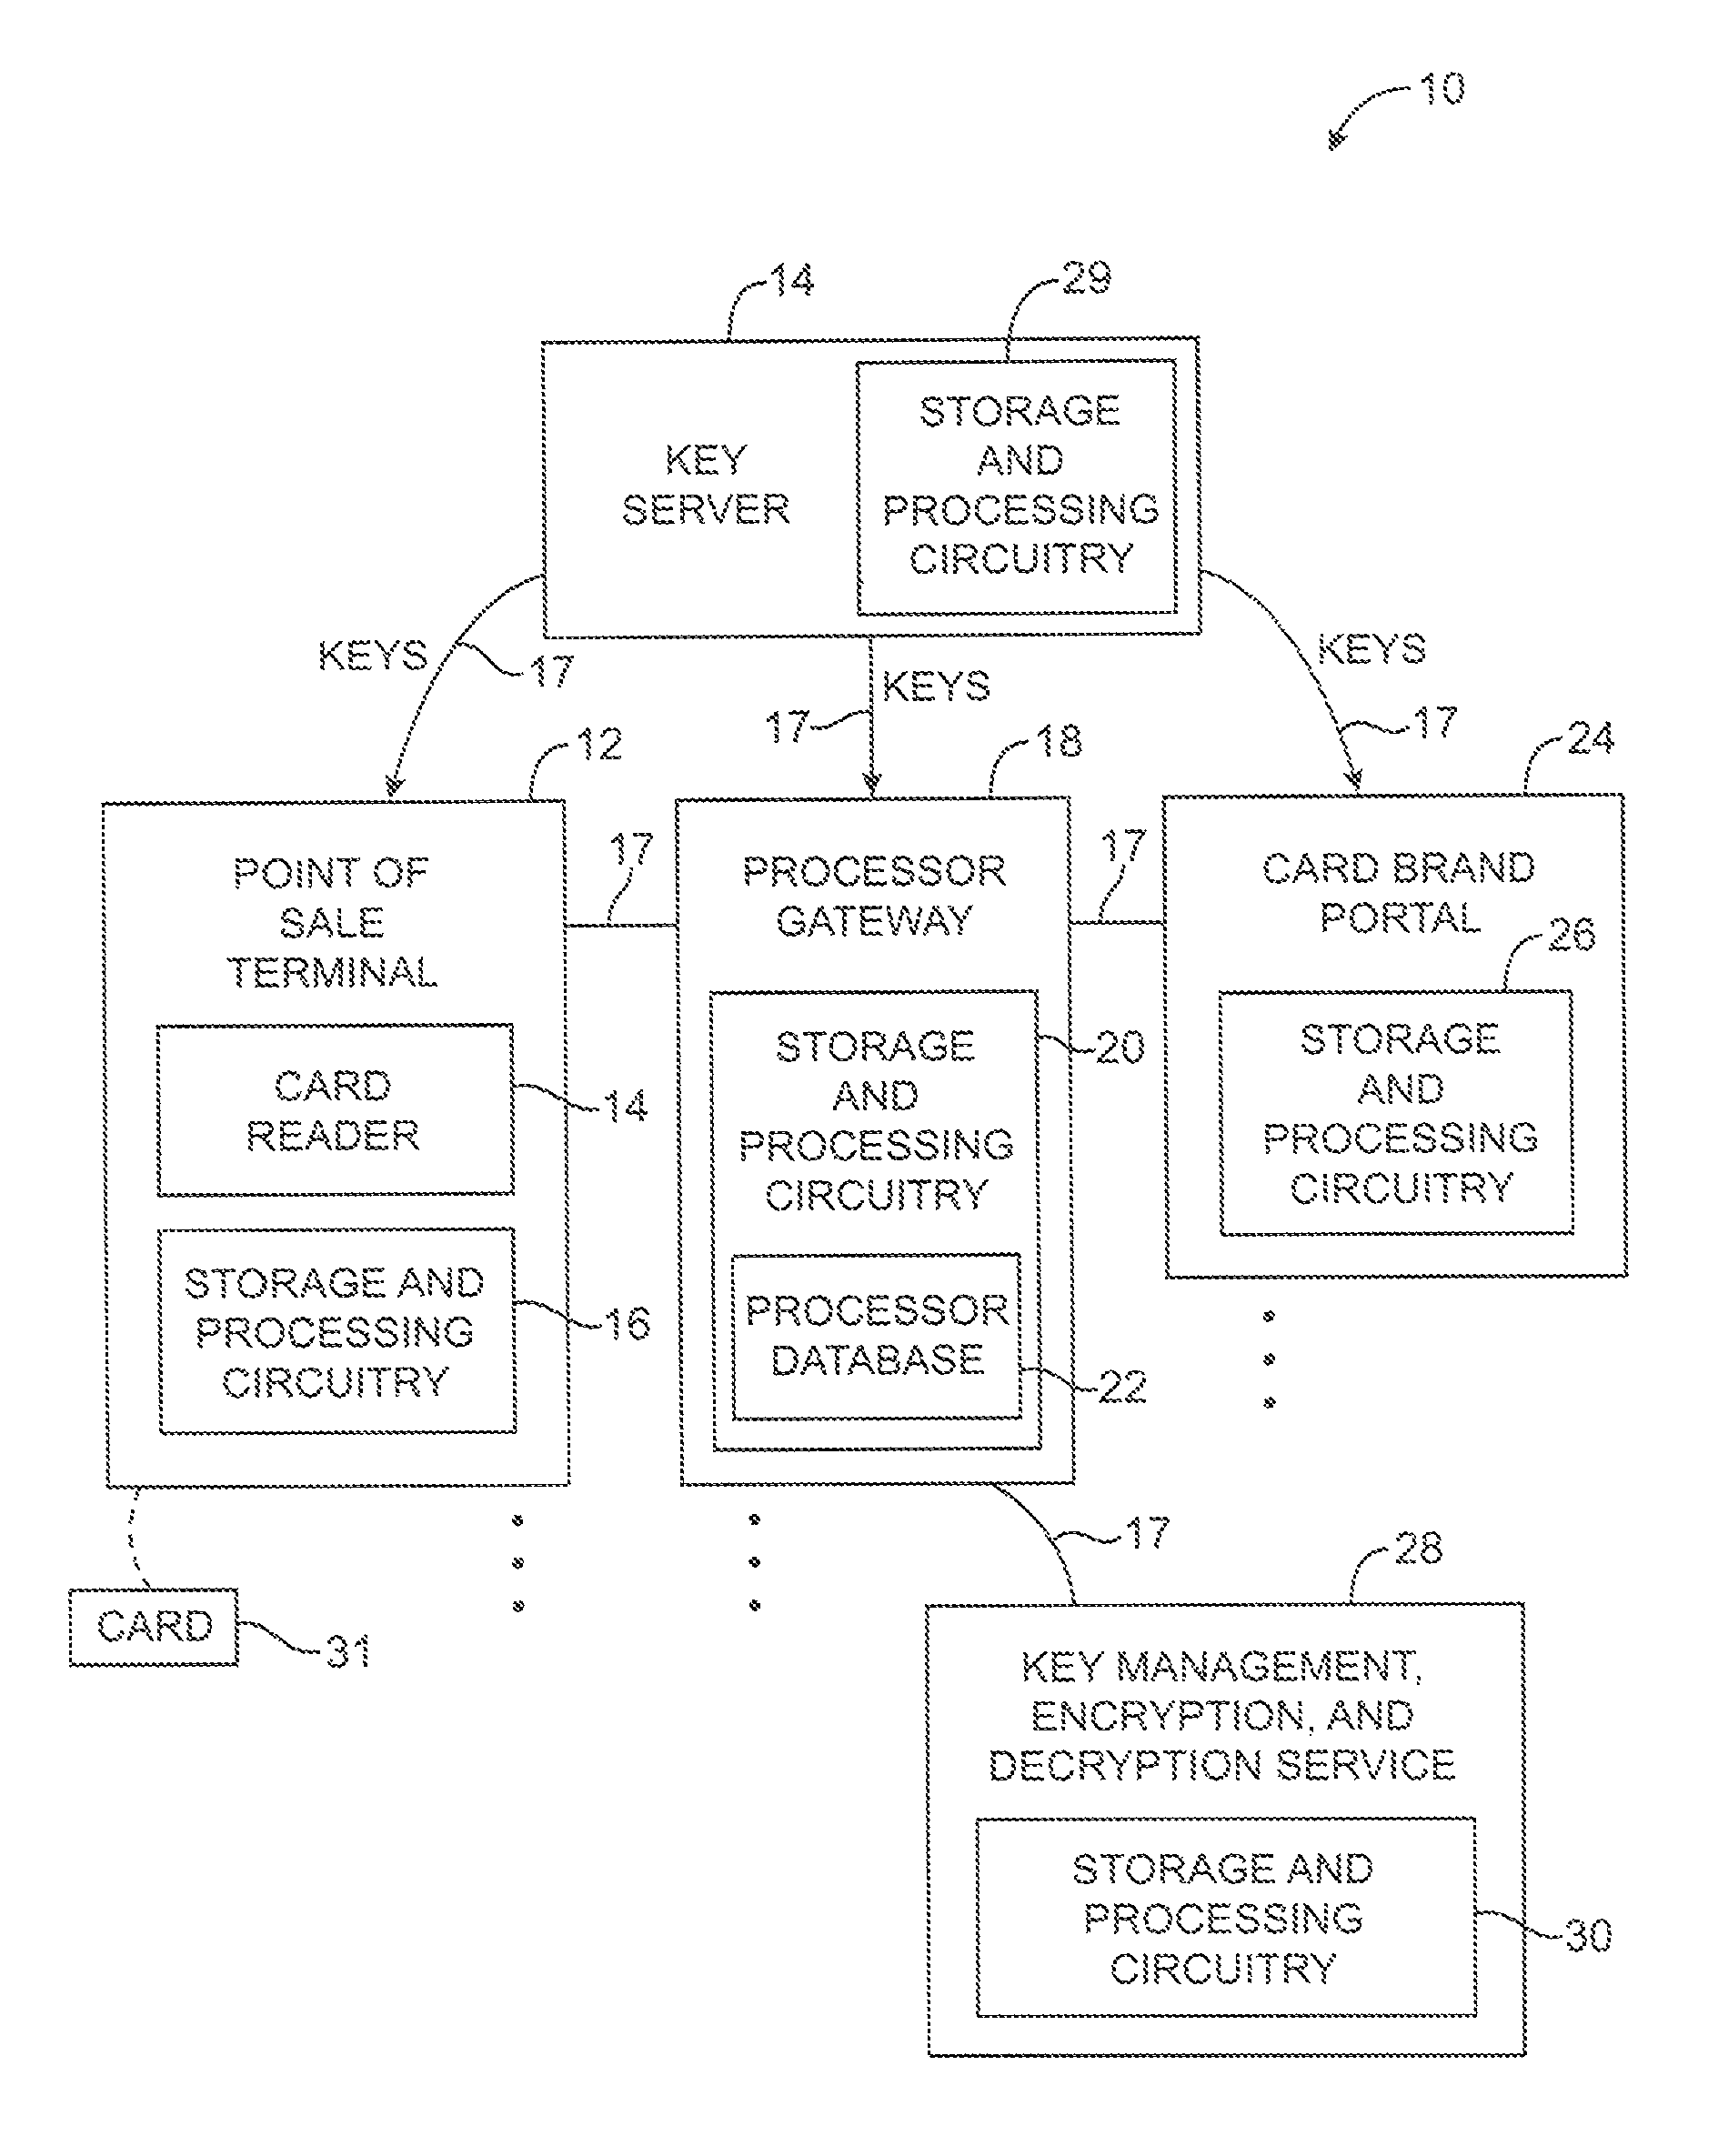 Purchase transaction system with encrypted payment card data